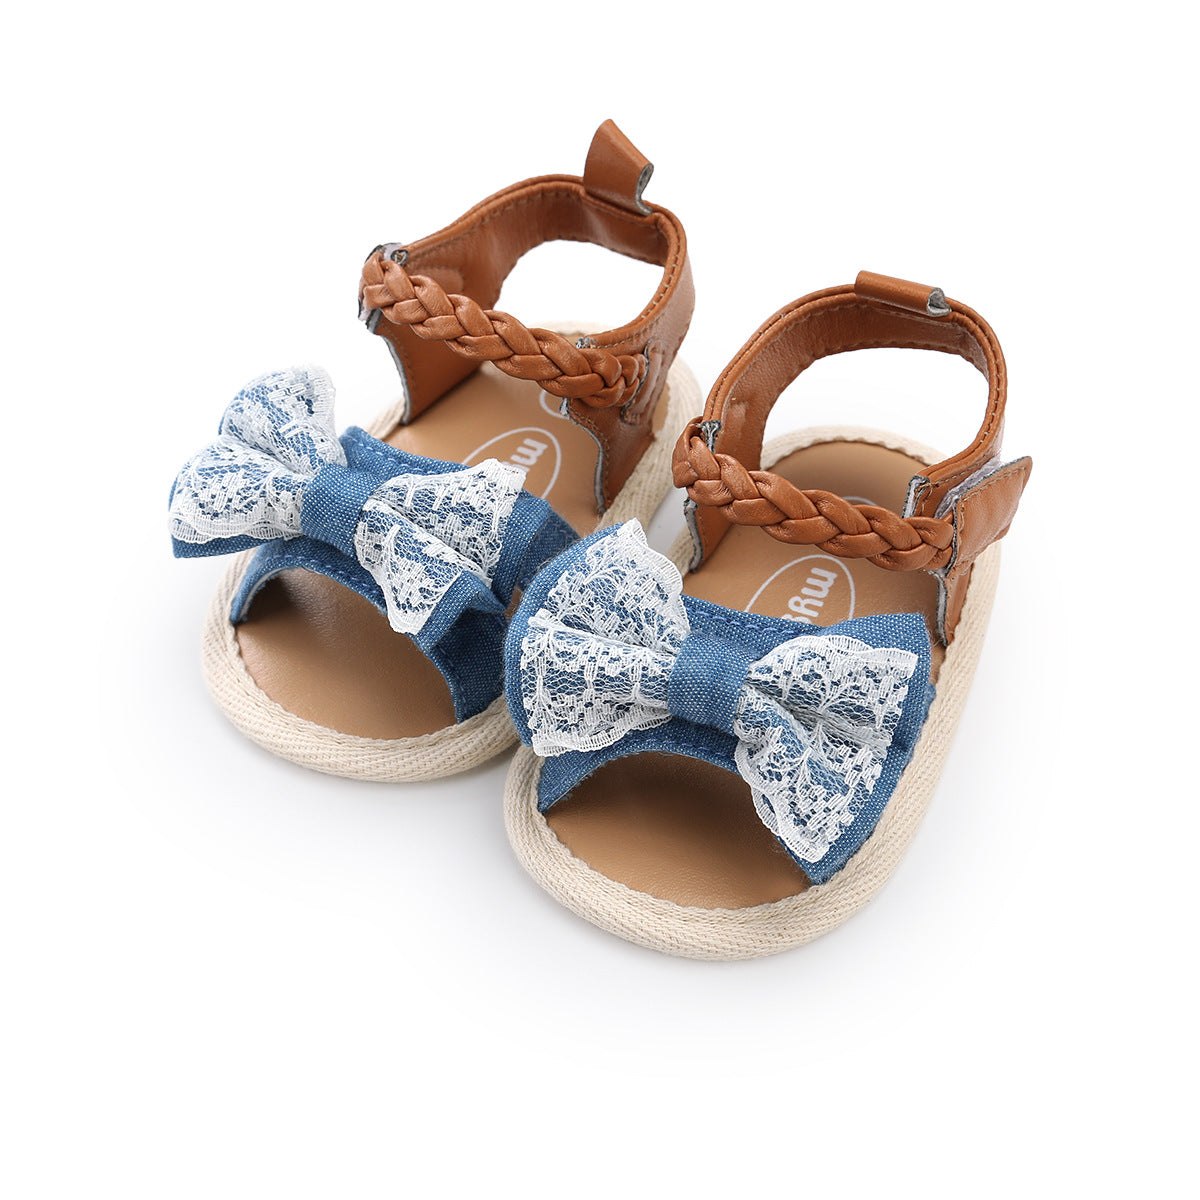 Lace Baby Toddler Cloth Sole Sandals